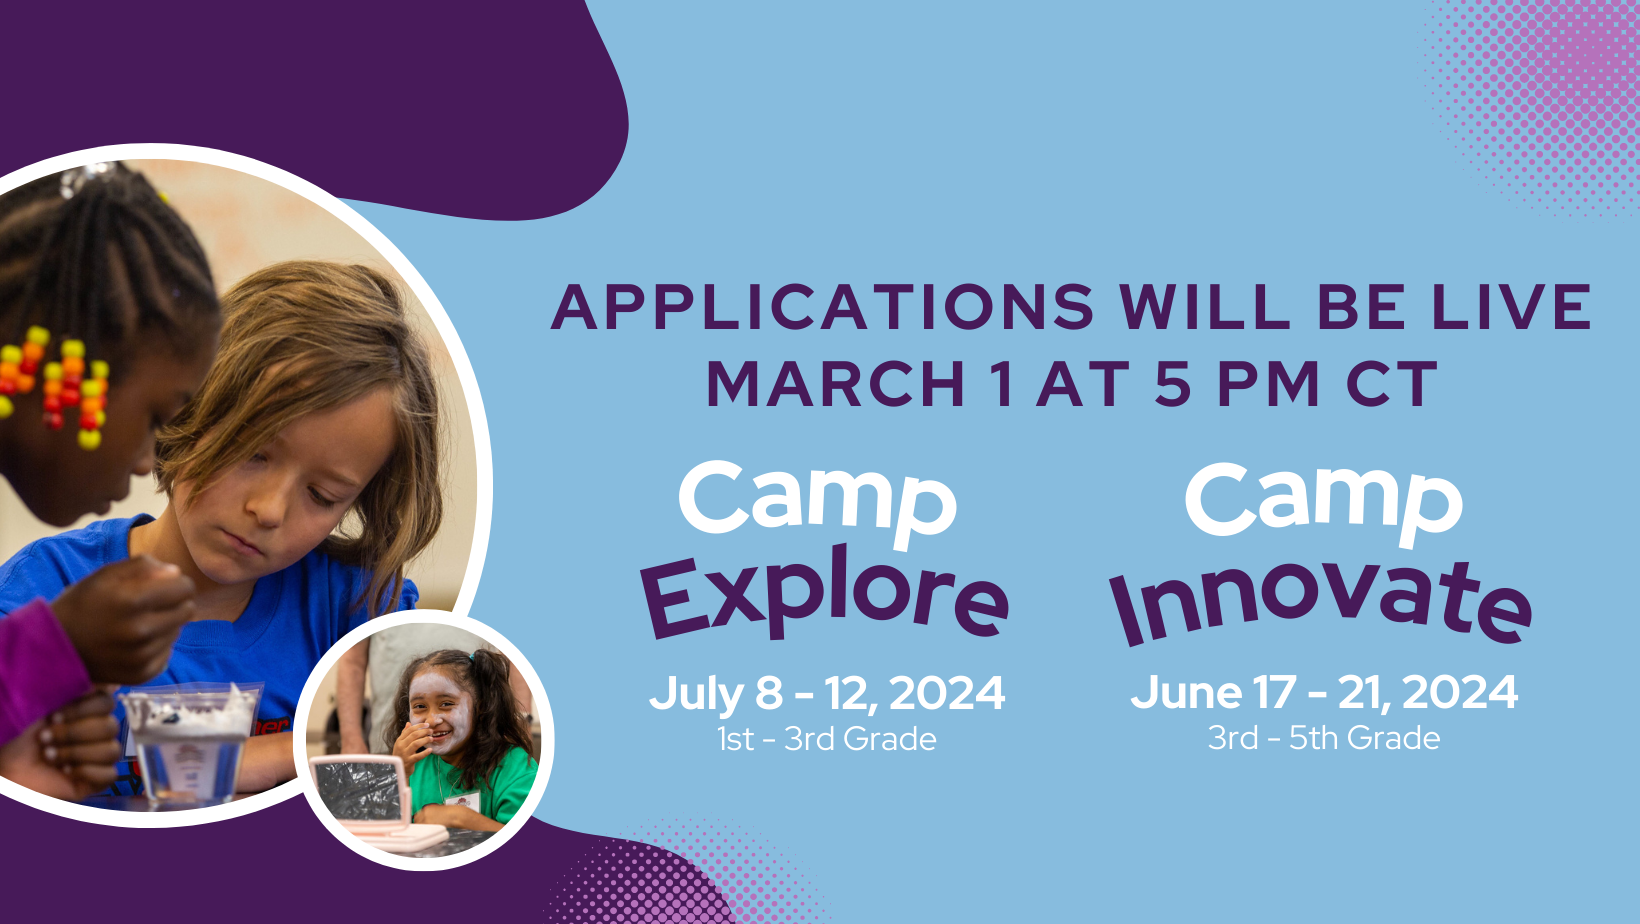 applications for camp explore and camp innovate will open march 1